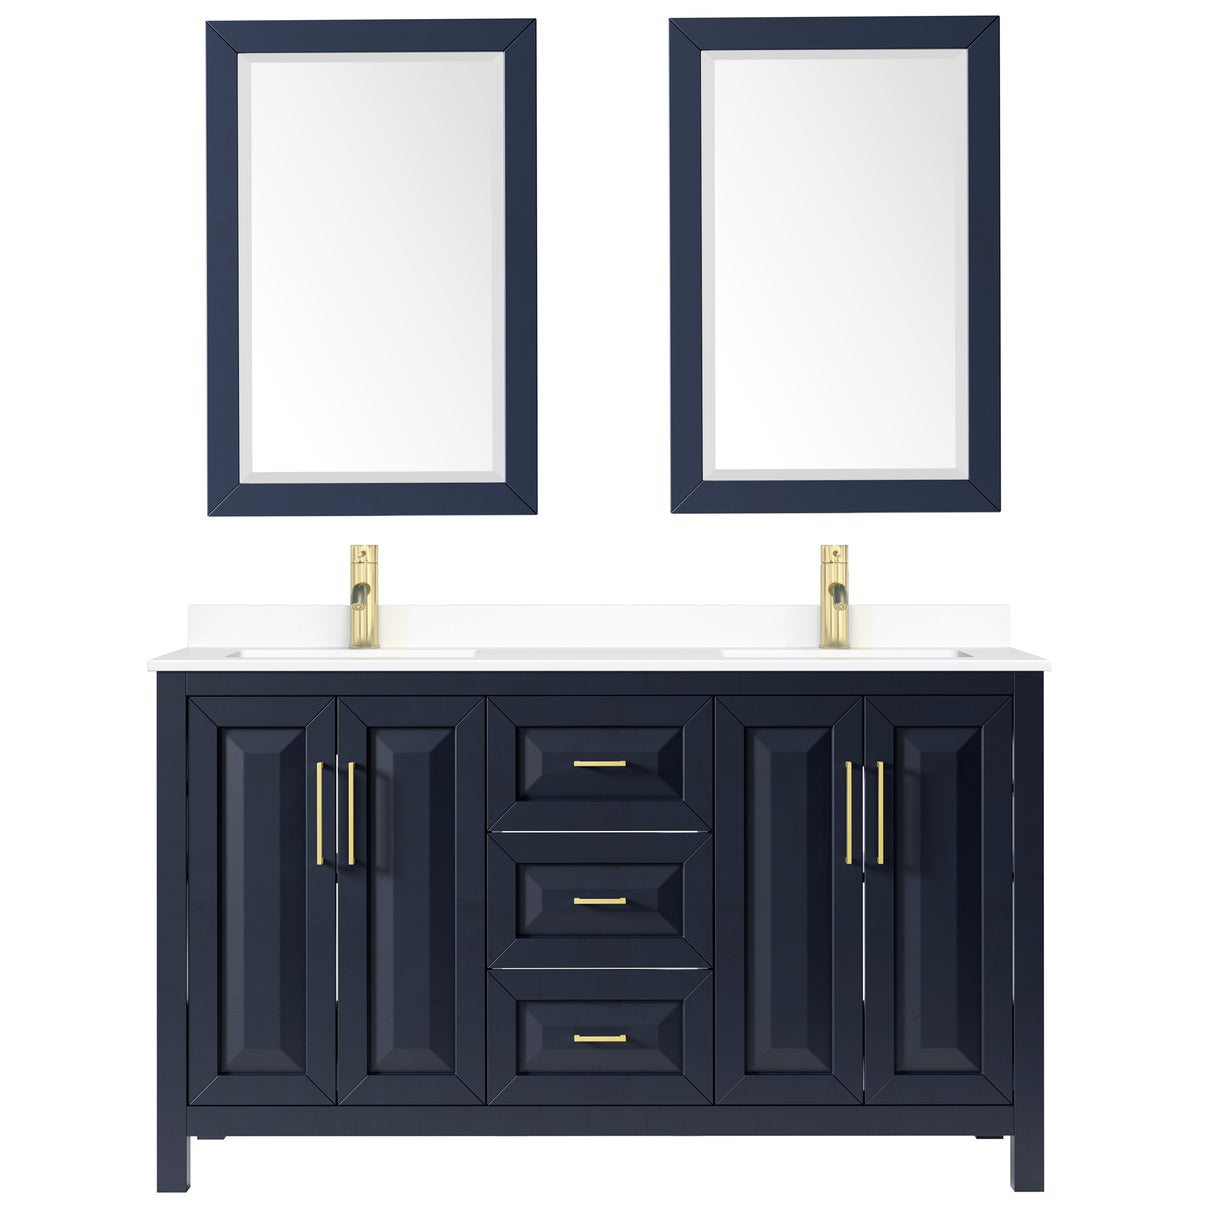 Daria 60 Inch Double Bathroom Vanity in Dark Blue White Cultured Marble Countertop Undermount Square Sinks 24 Inch Mirrors